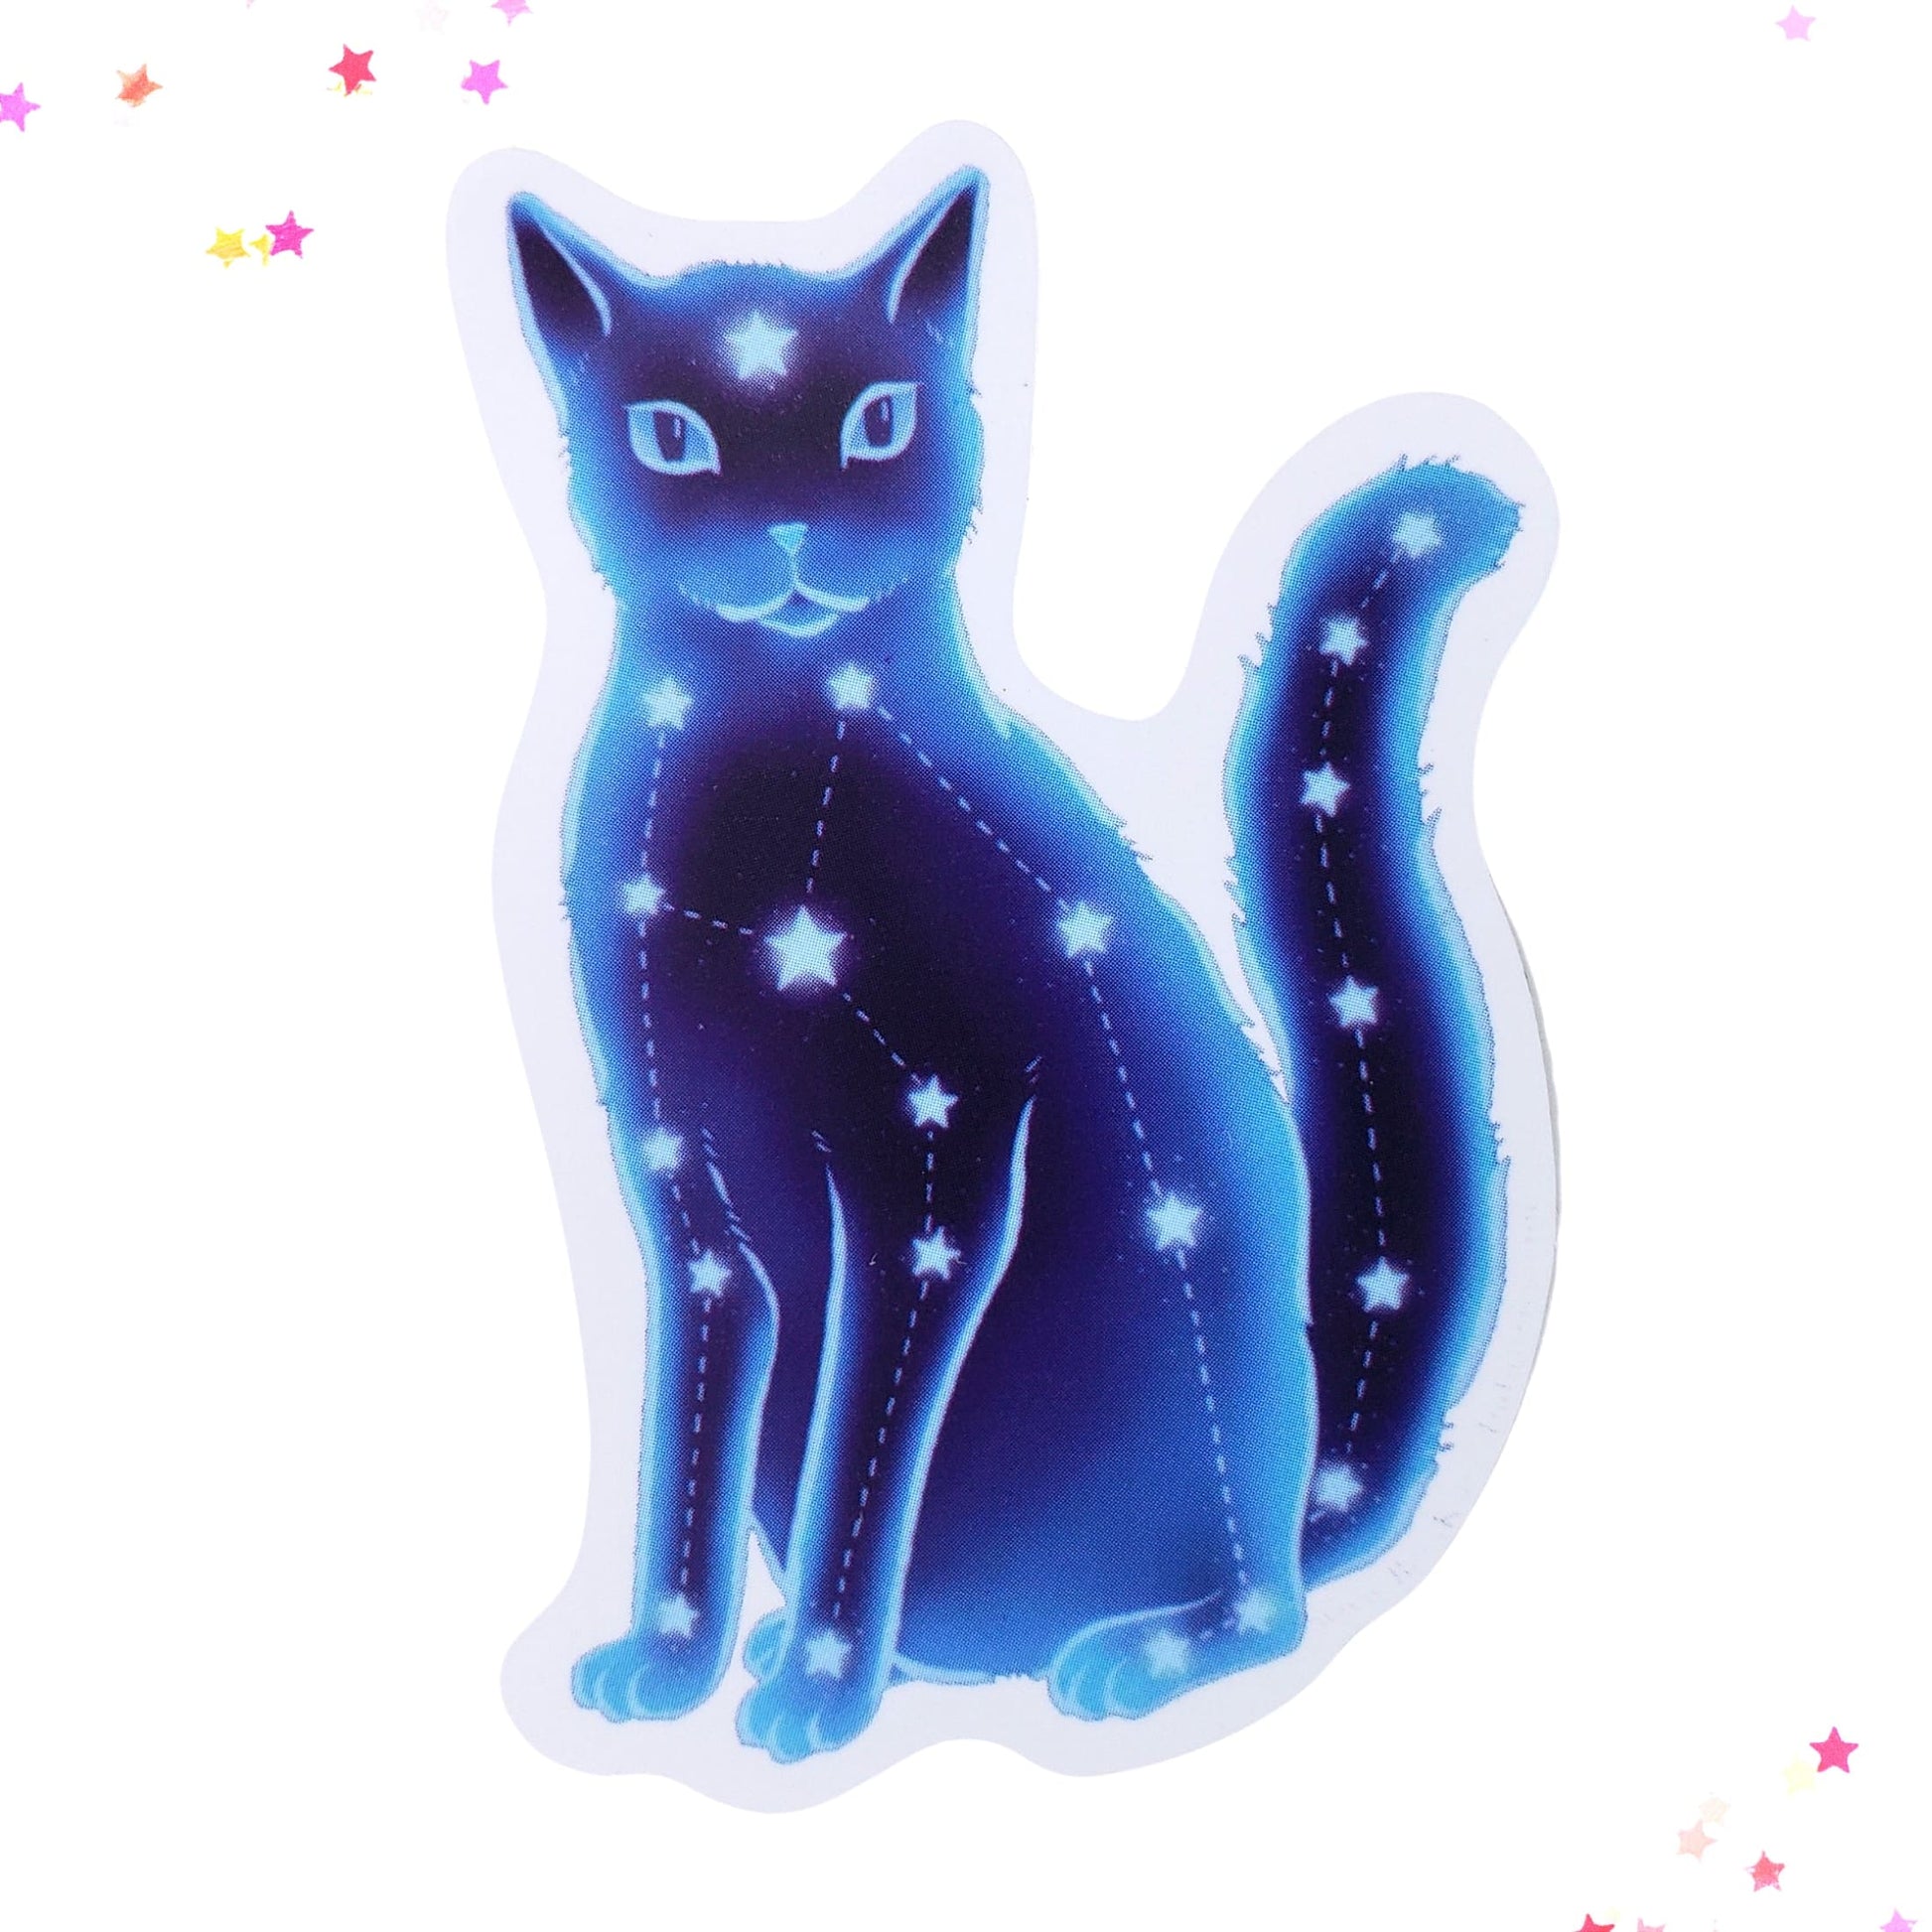 Constellation Cat Waterproof Sticker from Confetti Kitty, Only 1.00